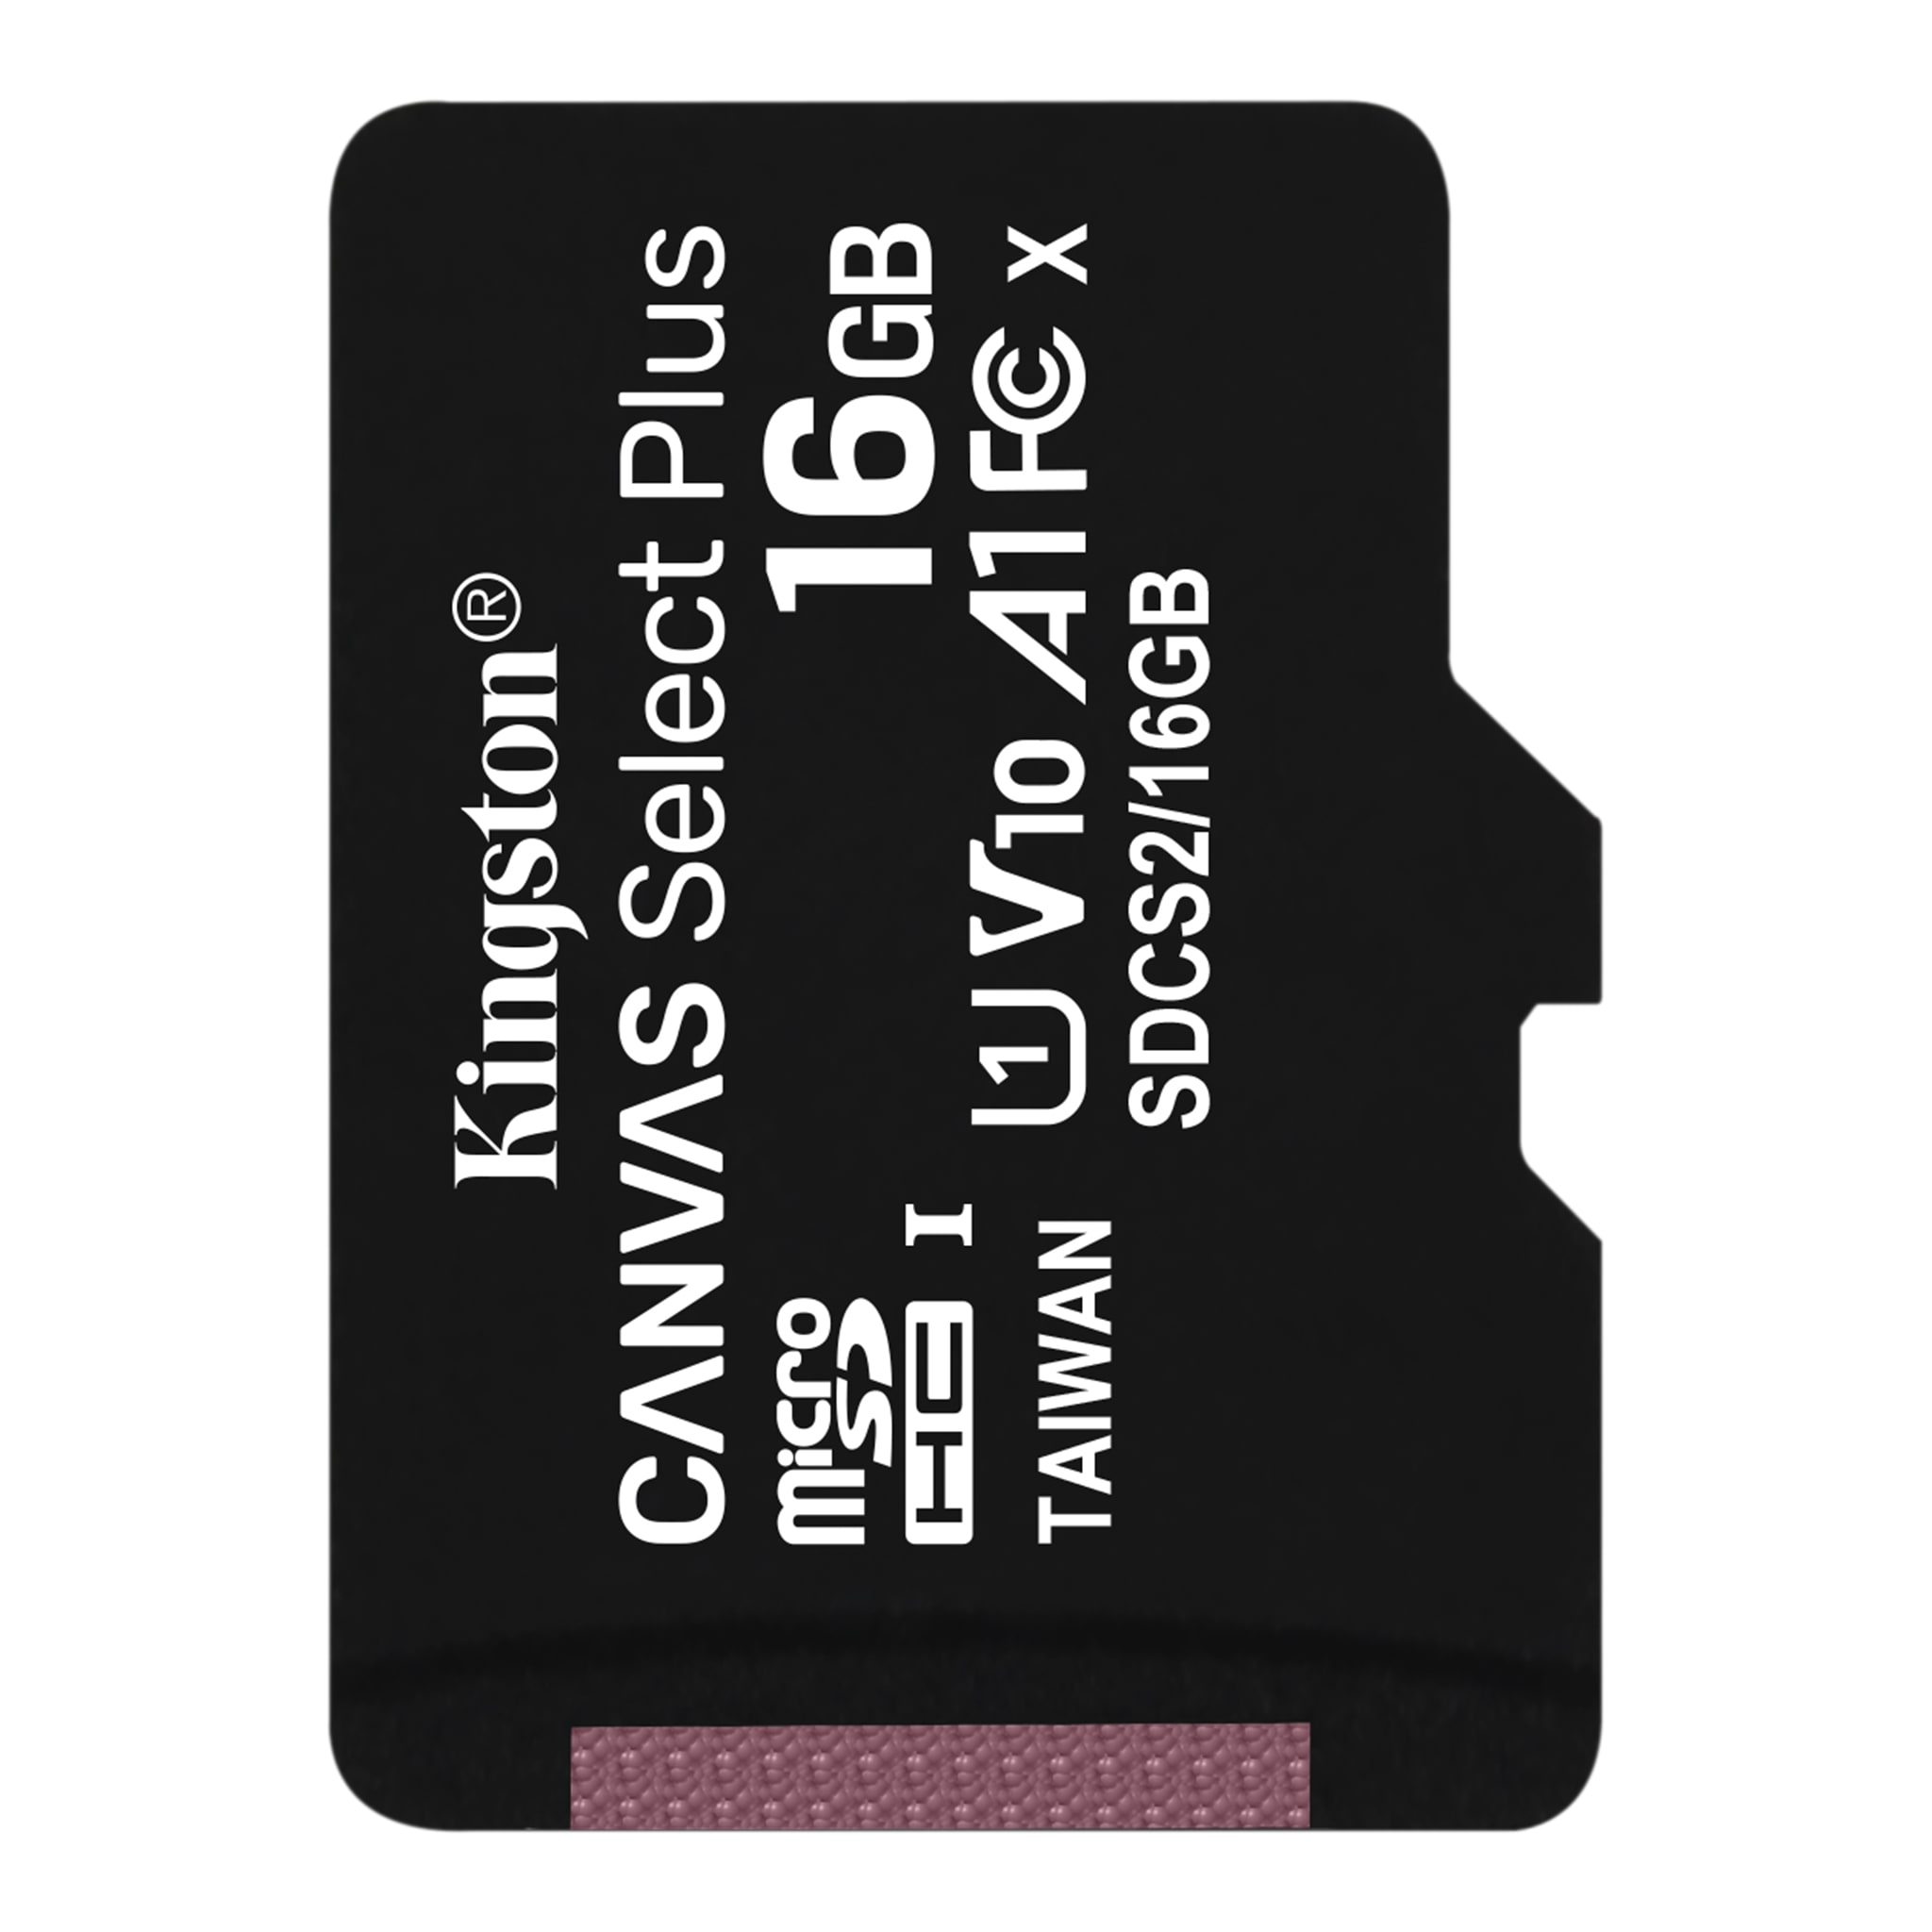 Kingston 32GB ICEMOBILE Rock Bold MicroSDHC Canvas Select Plus Card Verified by SanFlash. 100MBs Works with Kingston